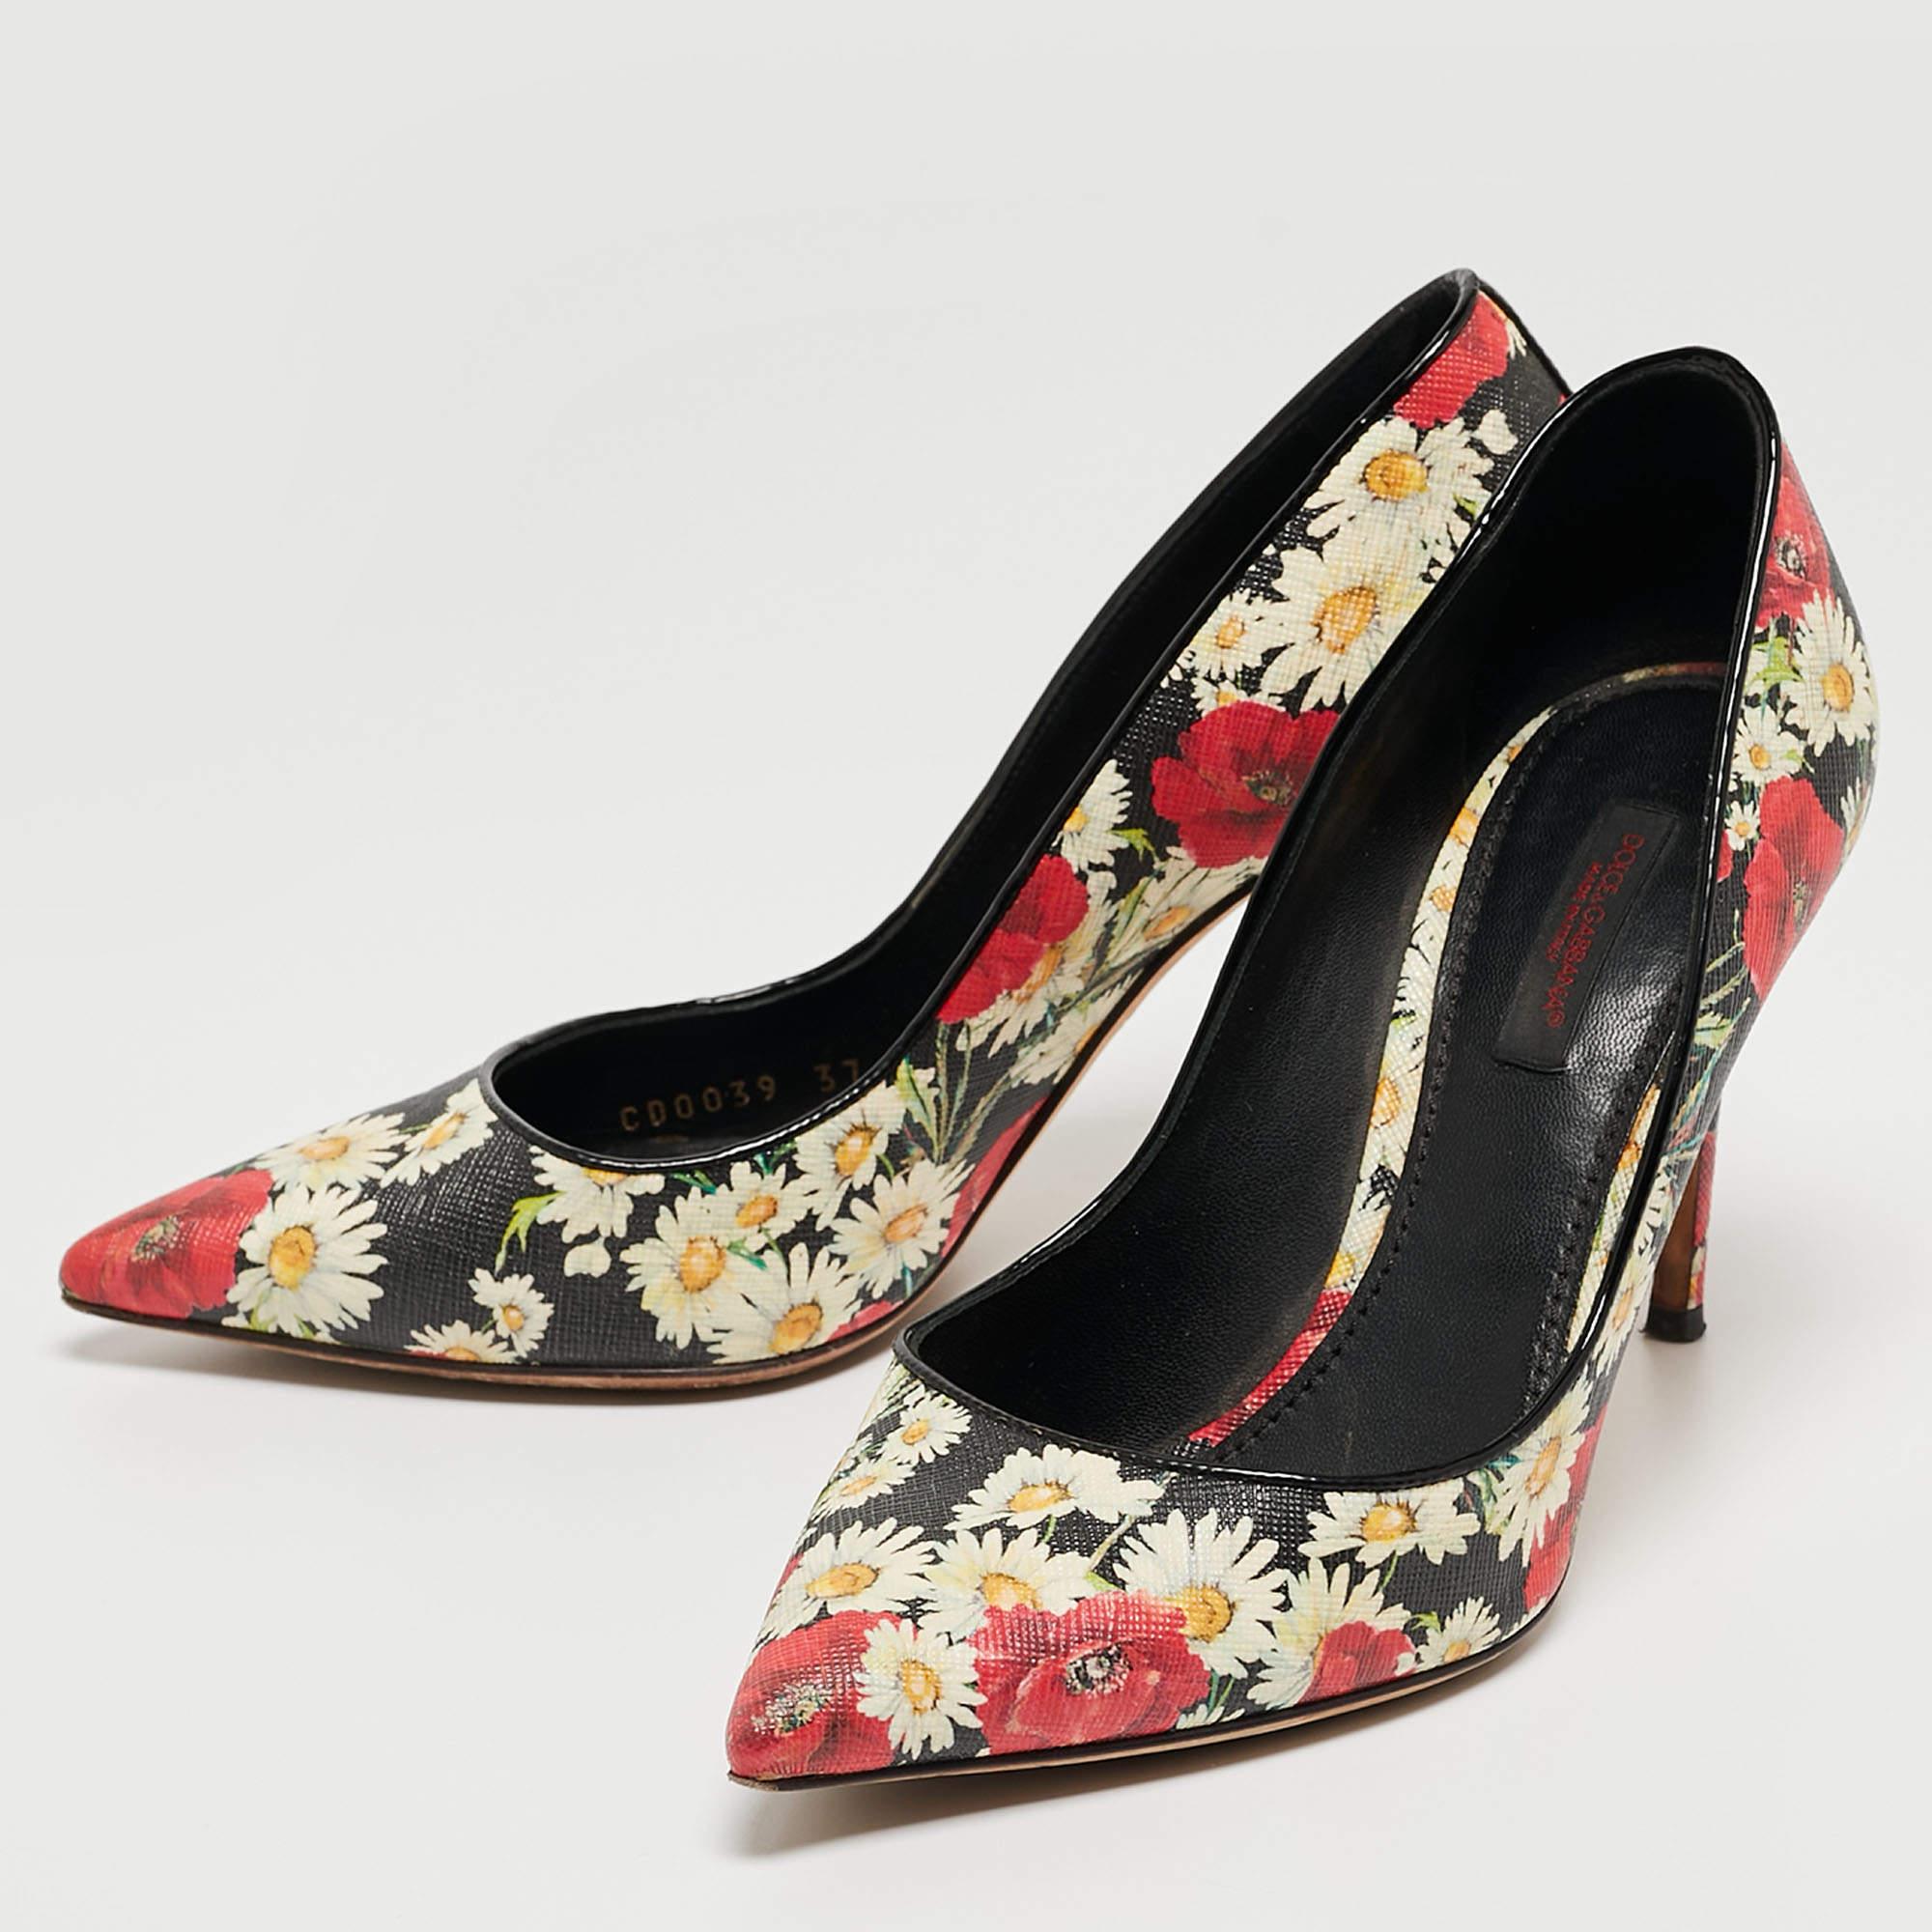 Women's Dolce & Gabbana Tricolor Floral Print Textured Leather Pointed Toe Pumps Size 37